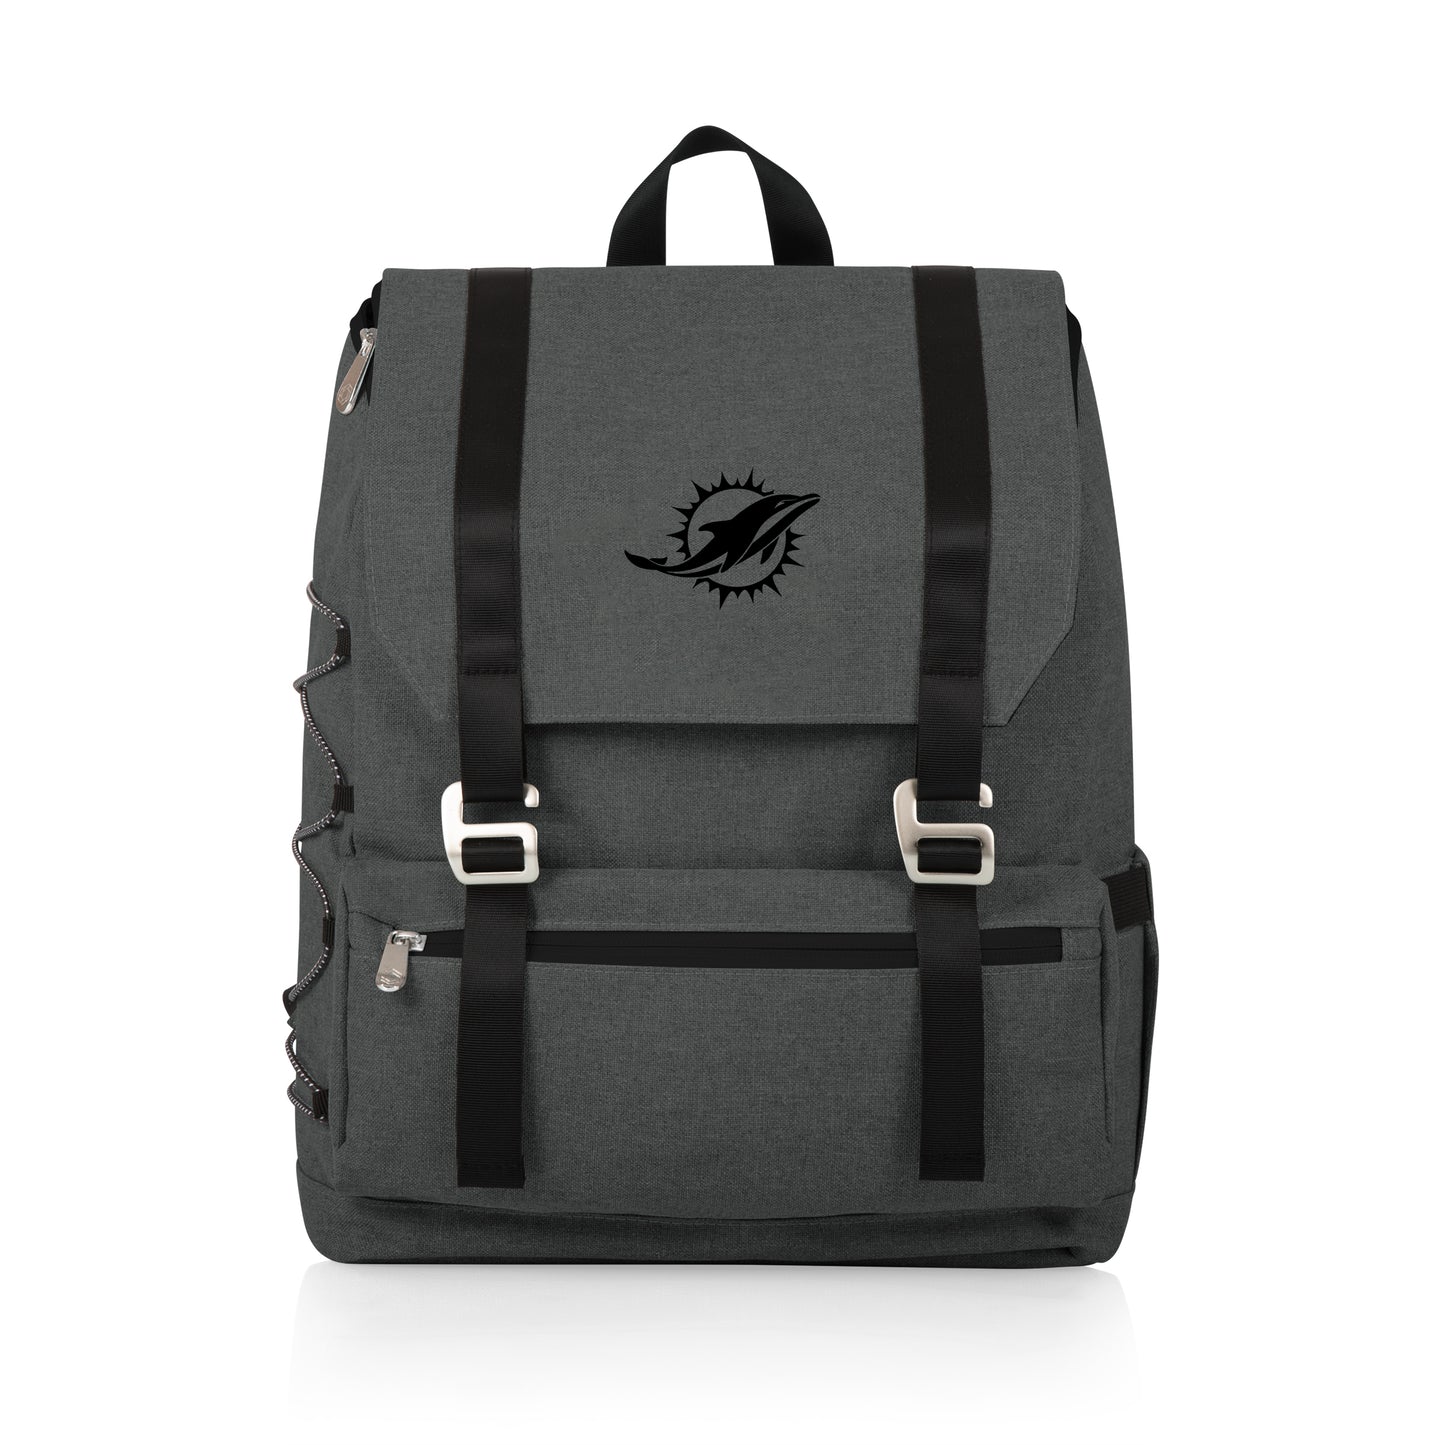 Miami Dolphins - On The Go Traverse Cooler Backpack